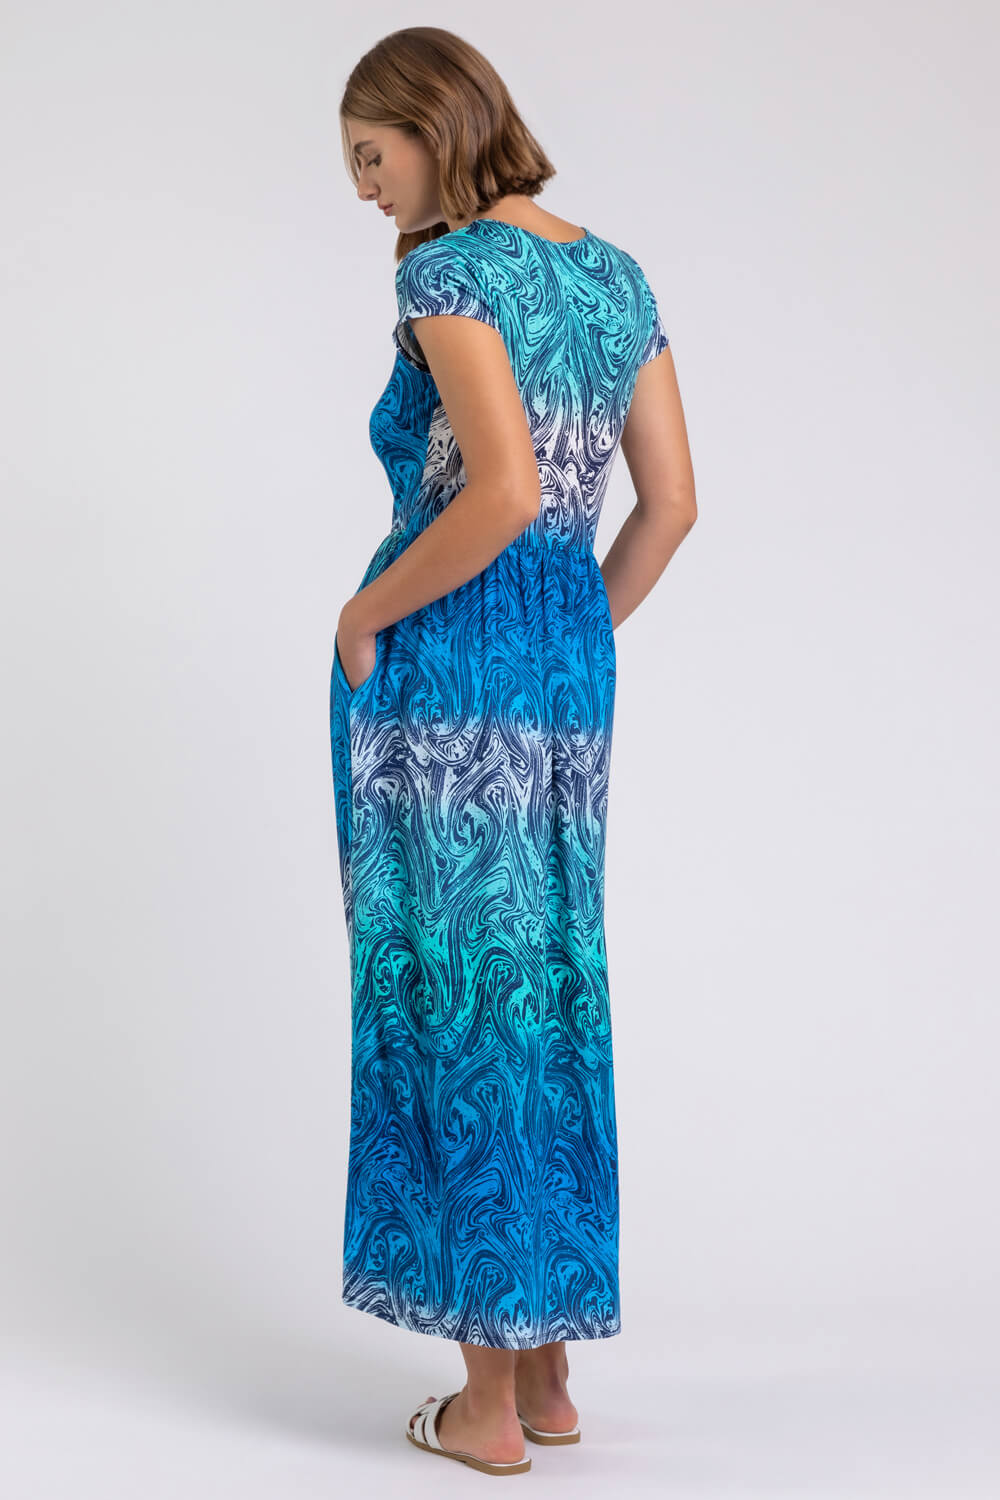 Blue Ombre Print Jersey Maxi Dress, Image 2 of 4